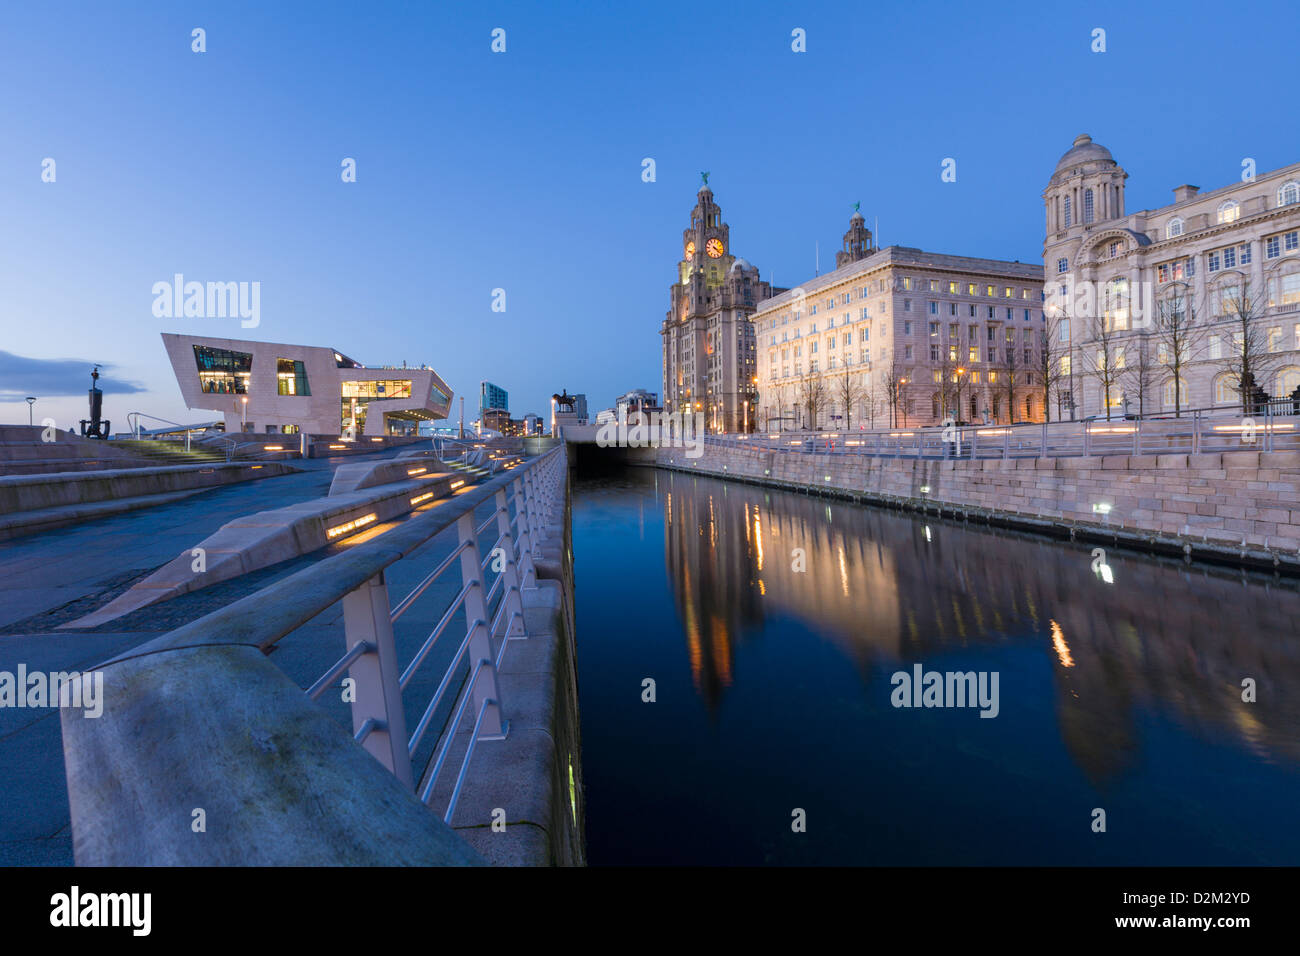 Pier head ferry terminal with Liver Building, Liverpool, England Stock Photo